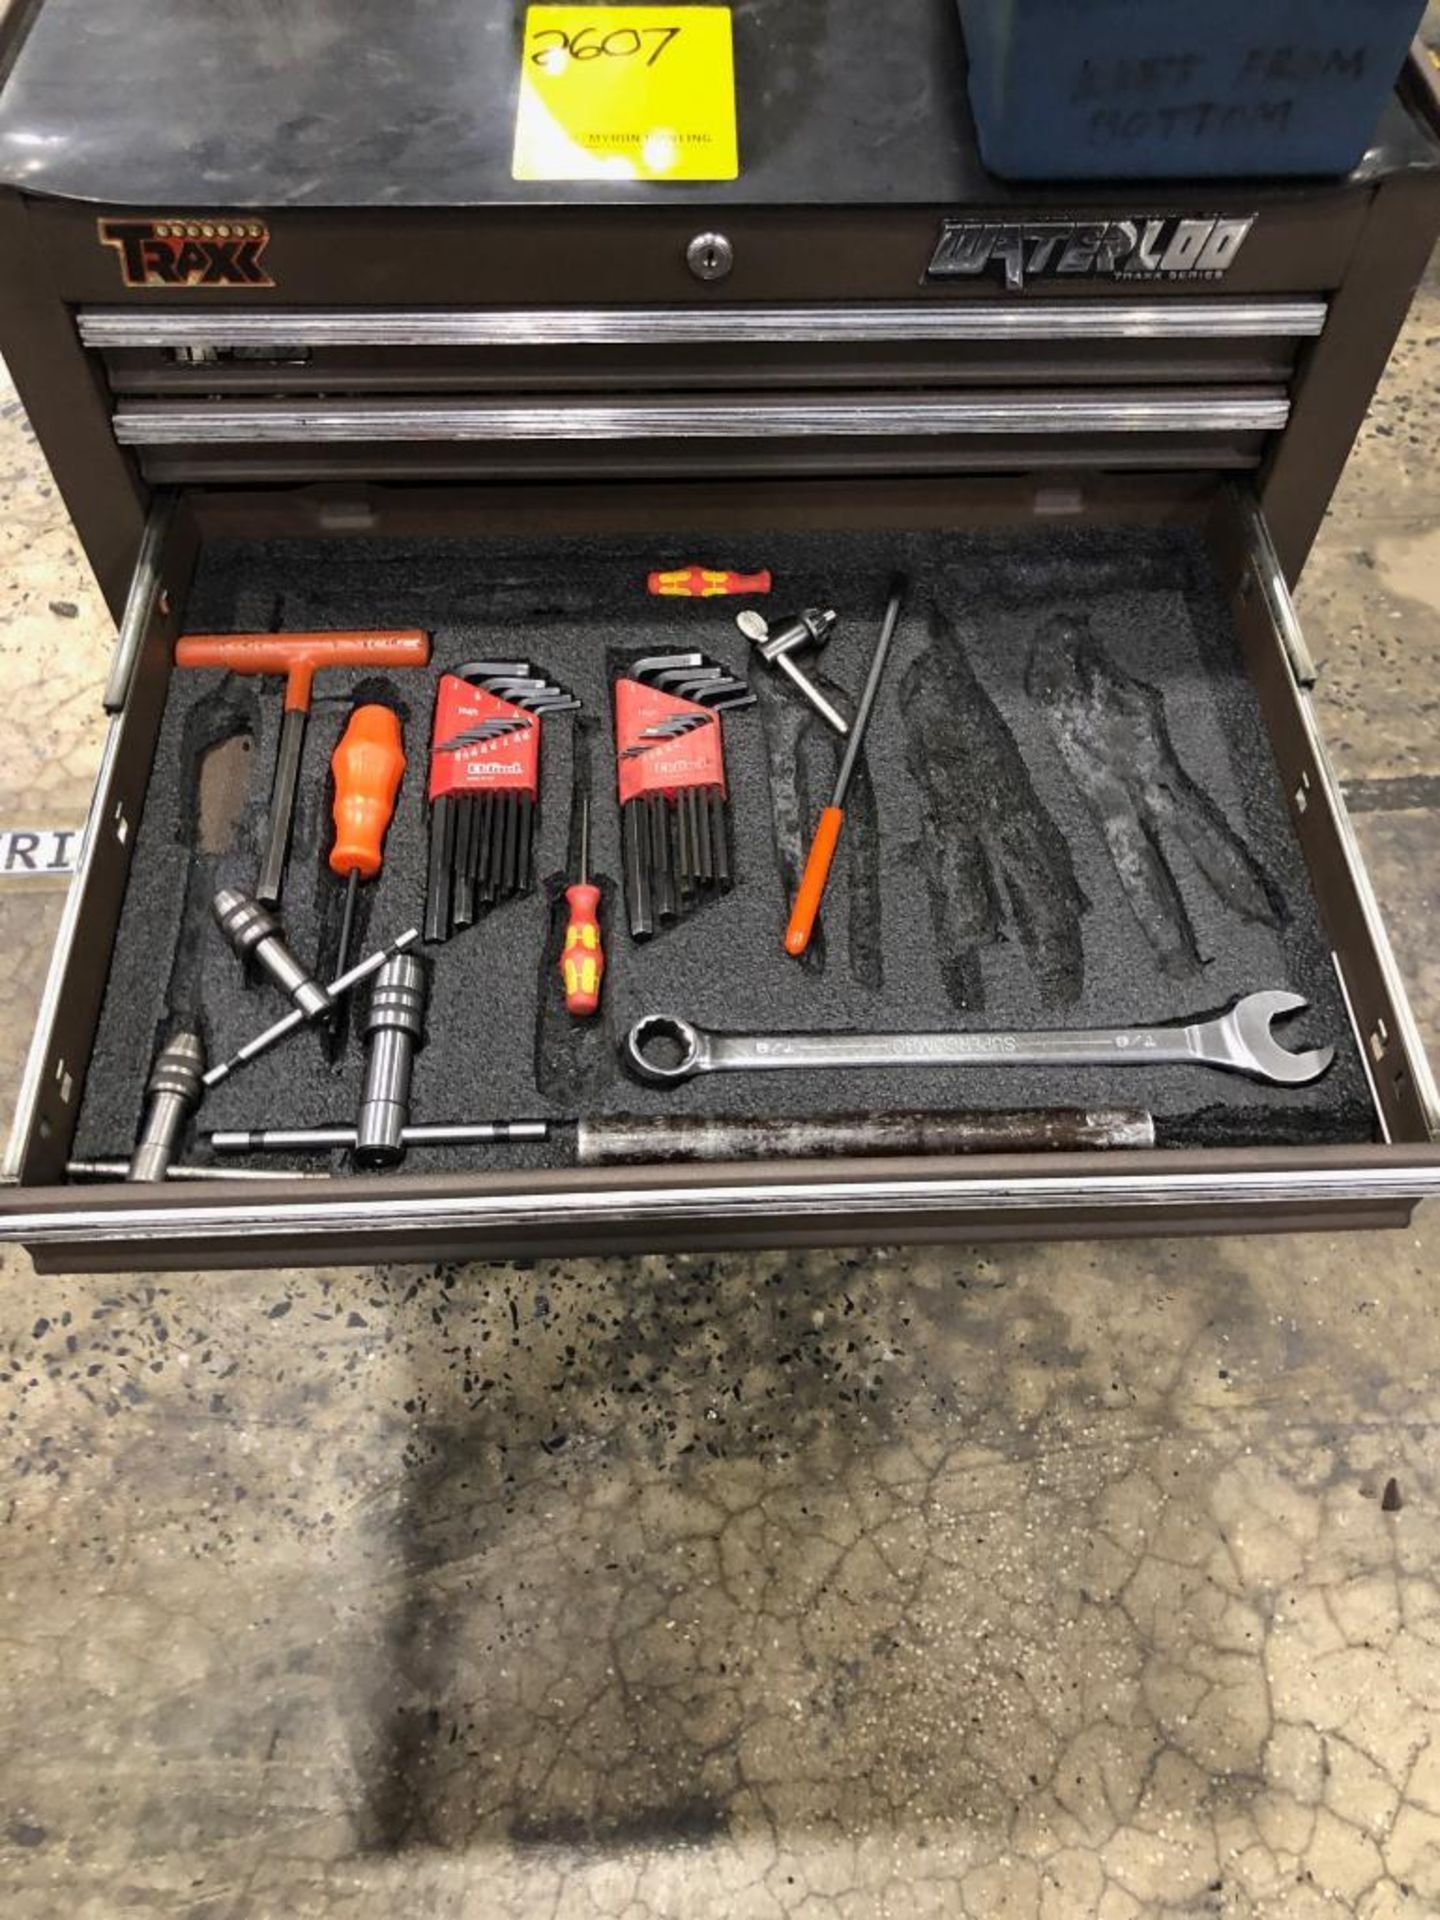 7-DRAWER WATERLOO TOOLBOX, W/ CONTENTS OF CHUCK JAWS, HOLD DOWNS, AND HAND TOOLS - Image 3 of 5